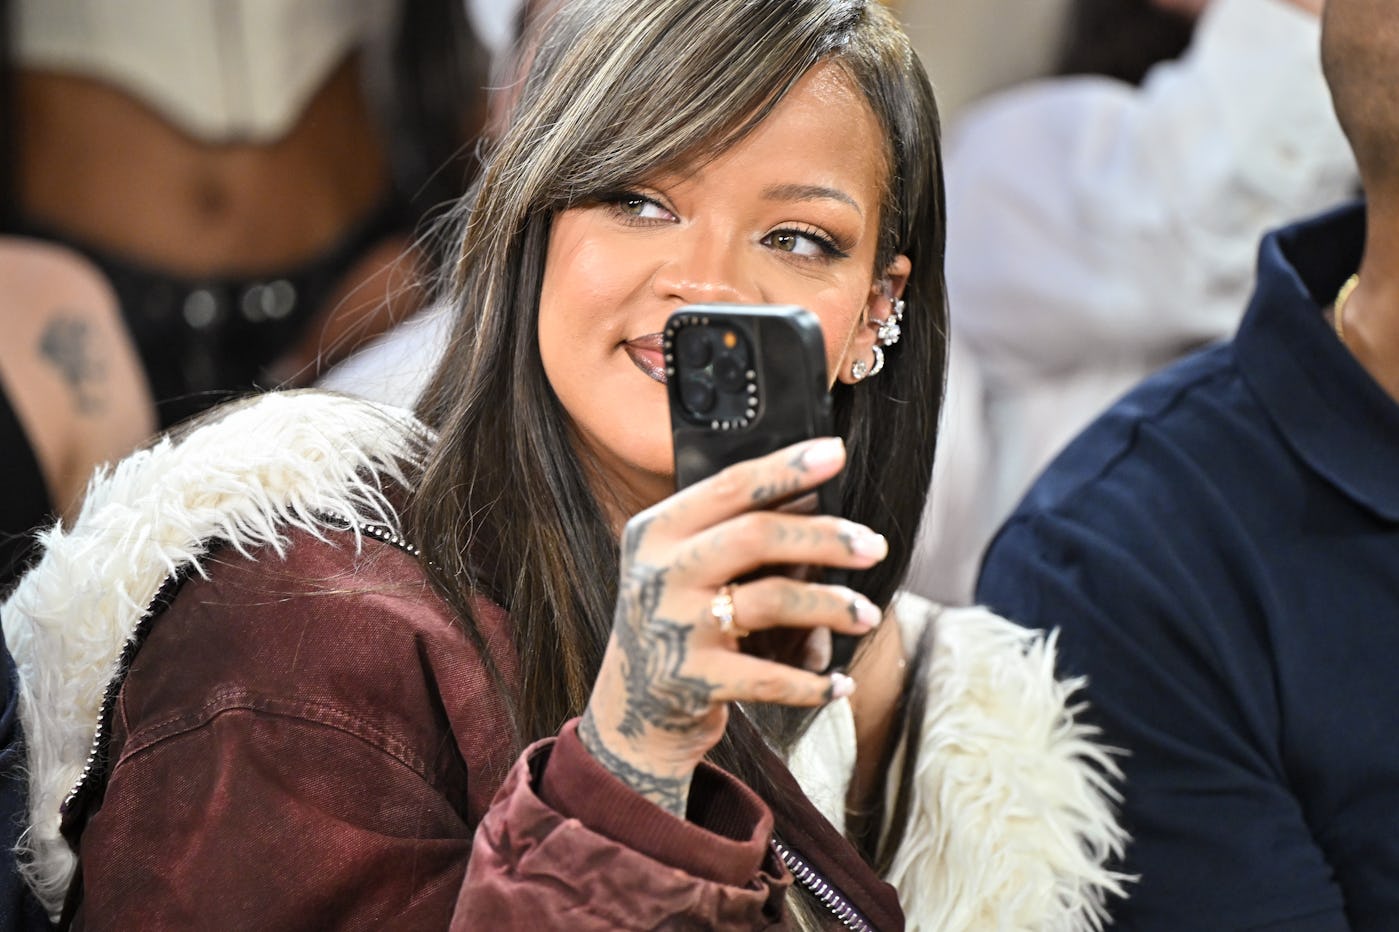 A woman in a white and burgundy jacket using a smartphone to take a photo, smiling with detailed tattoos on her hand.